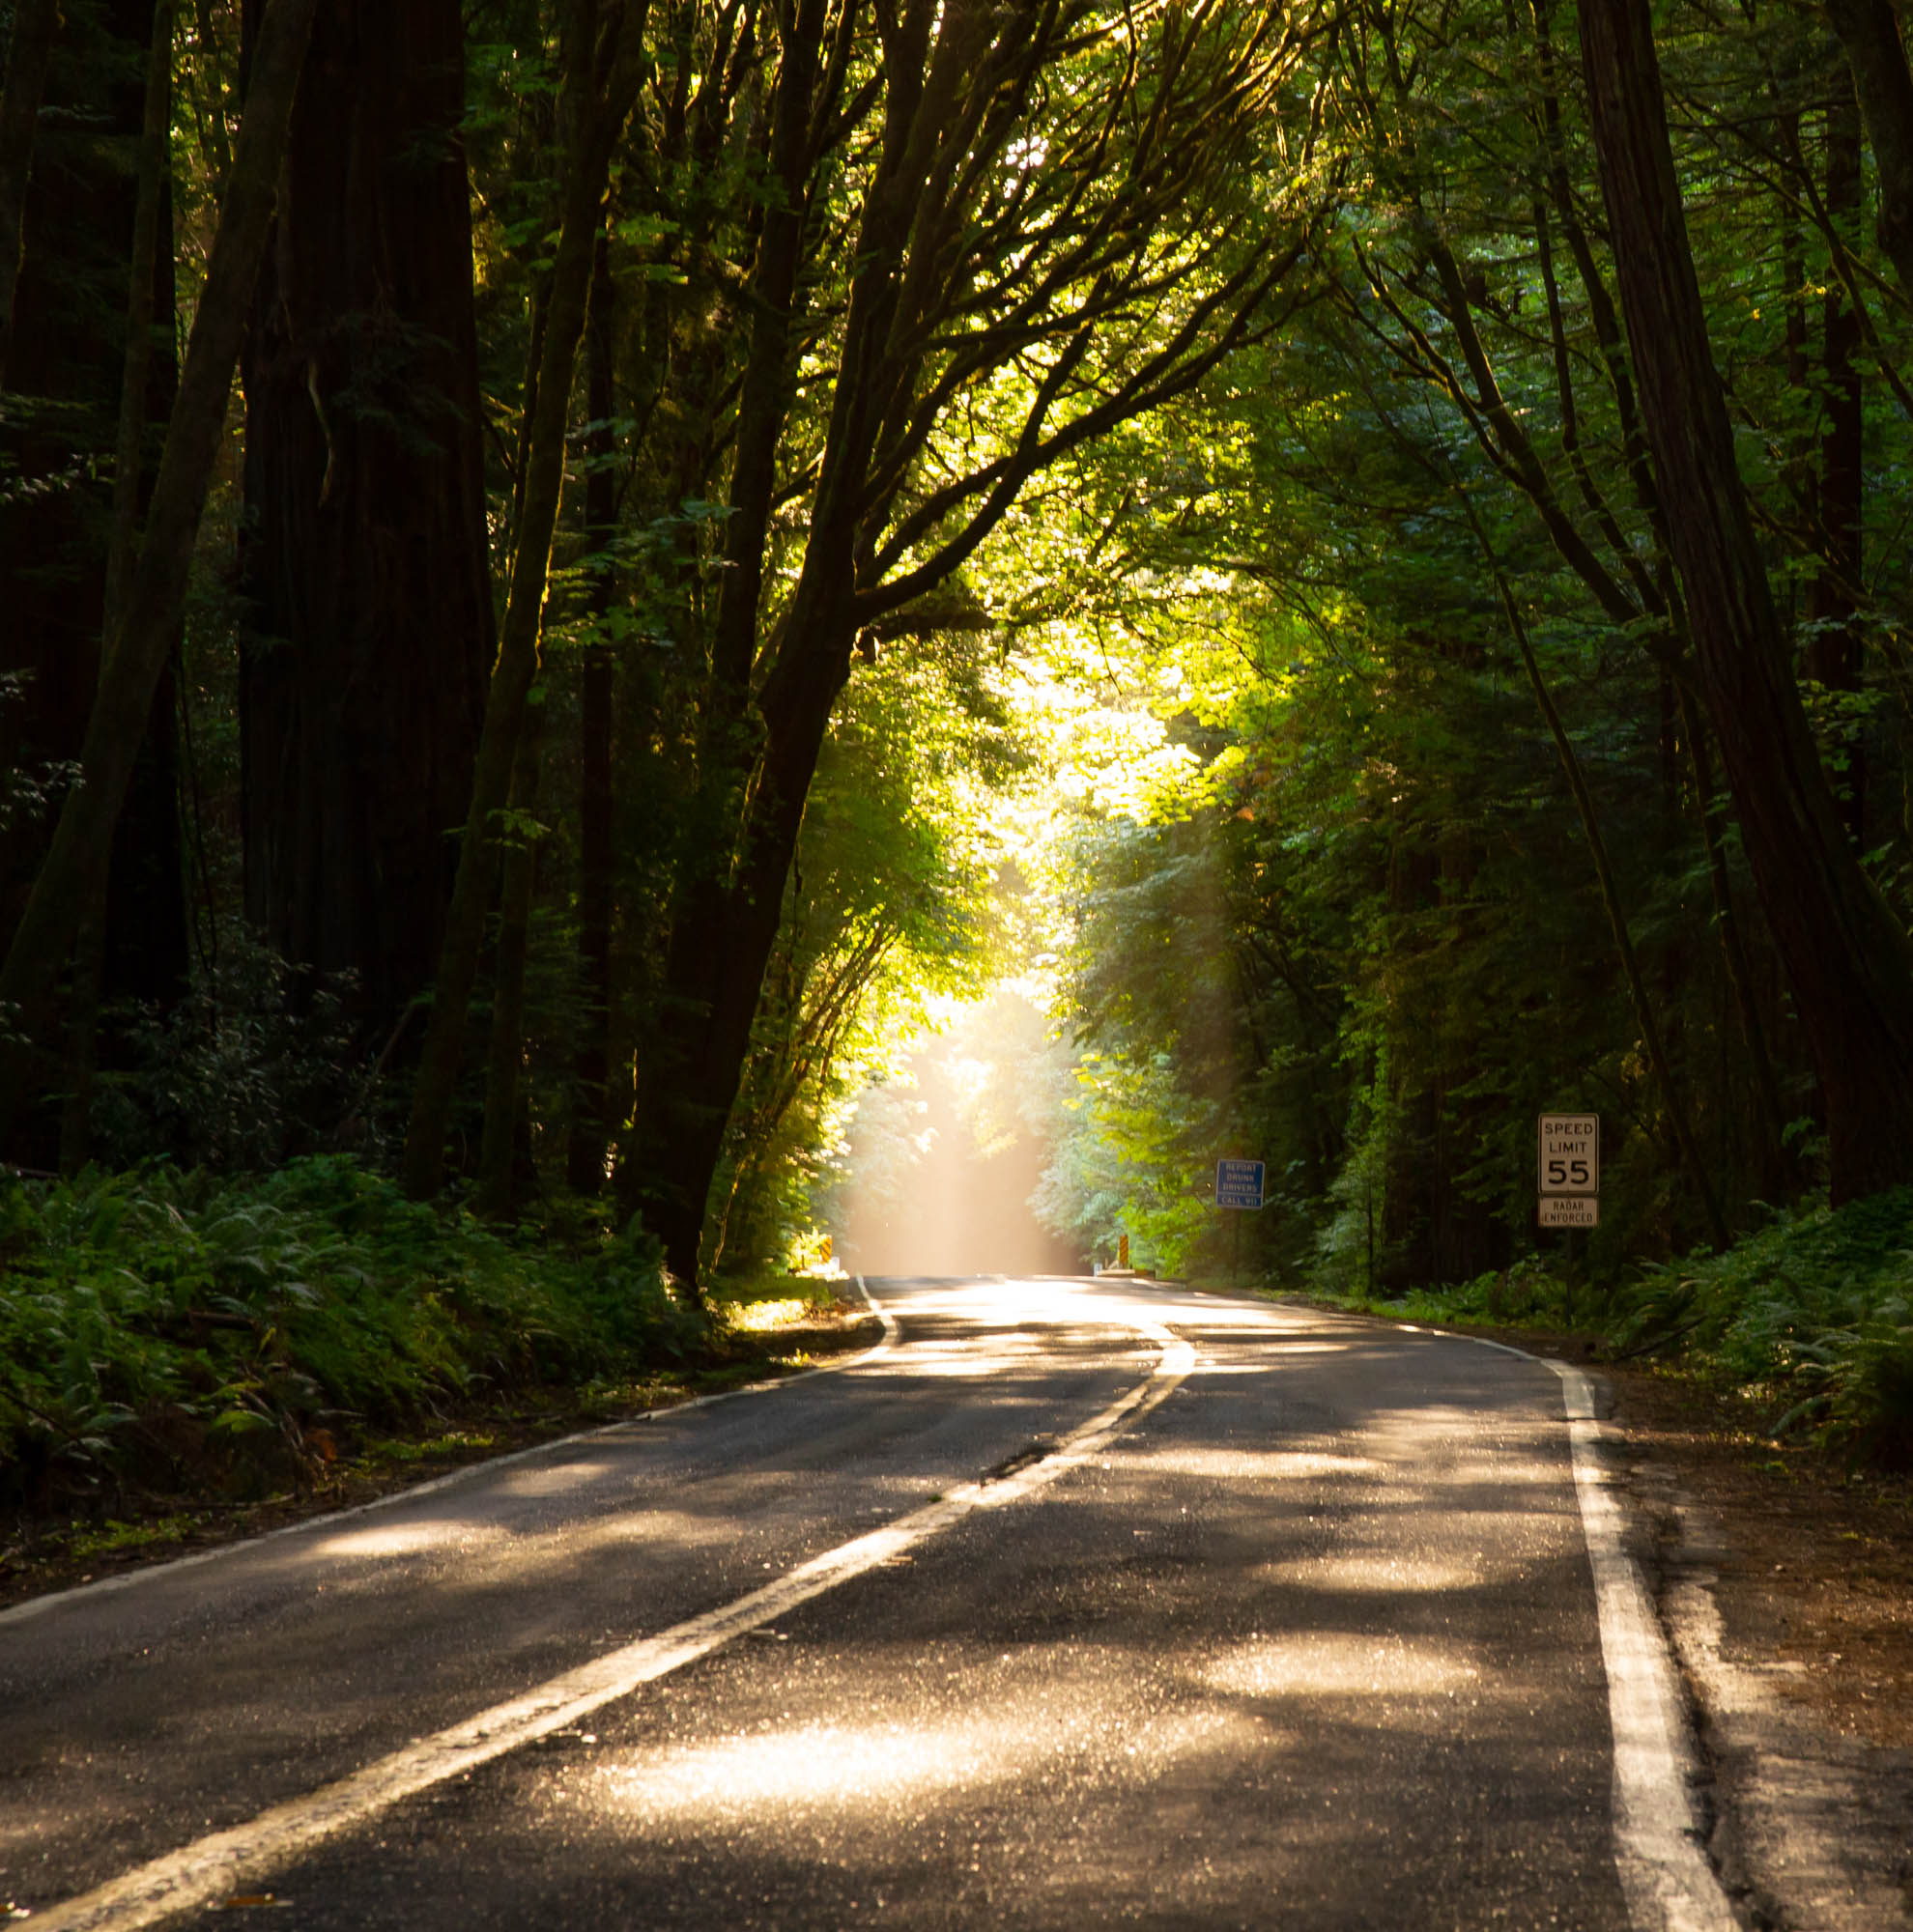 The sun filters through trees onto a rural road